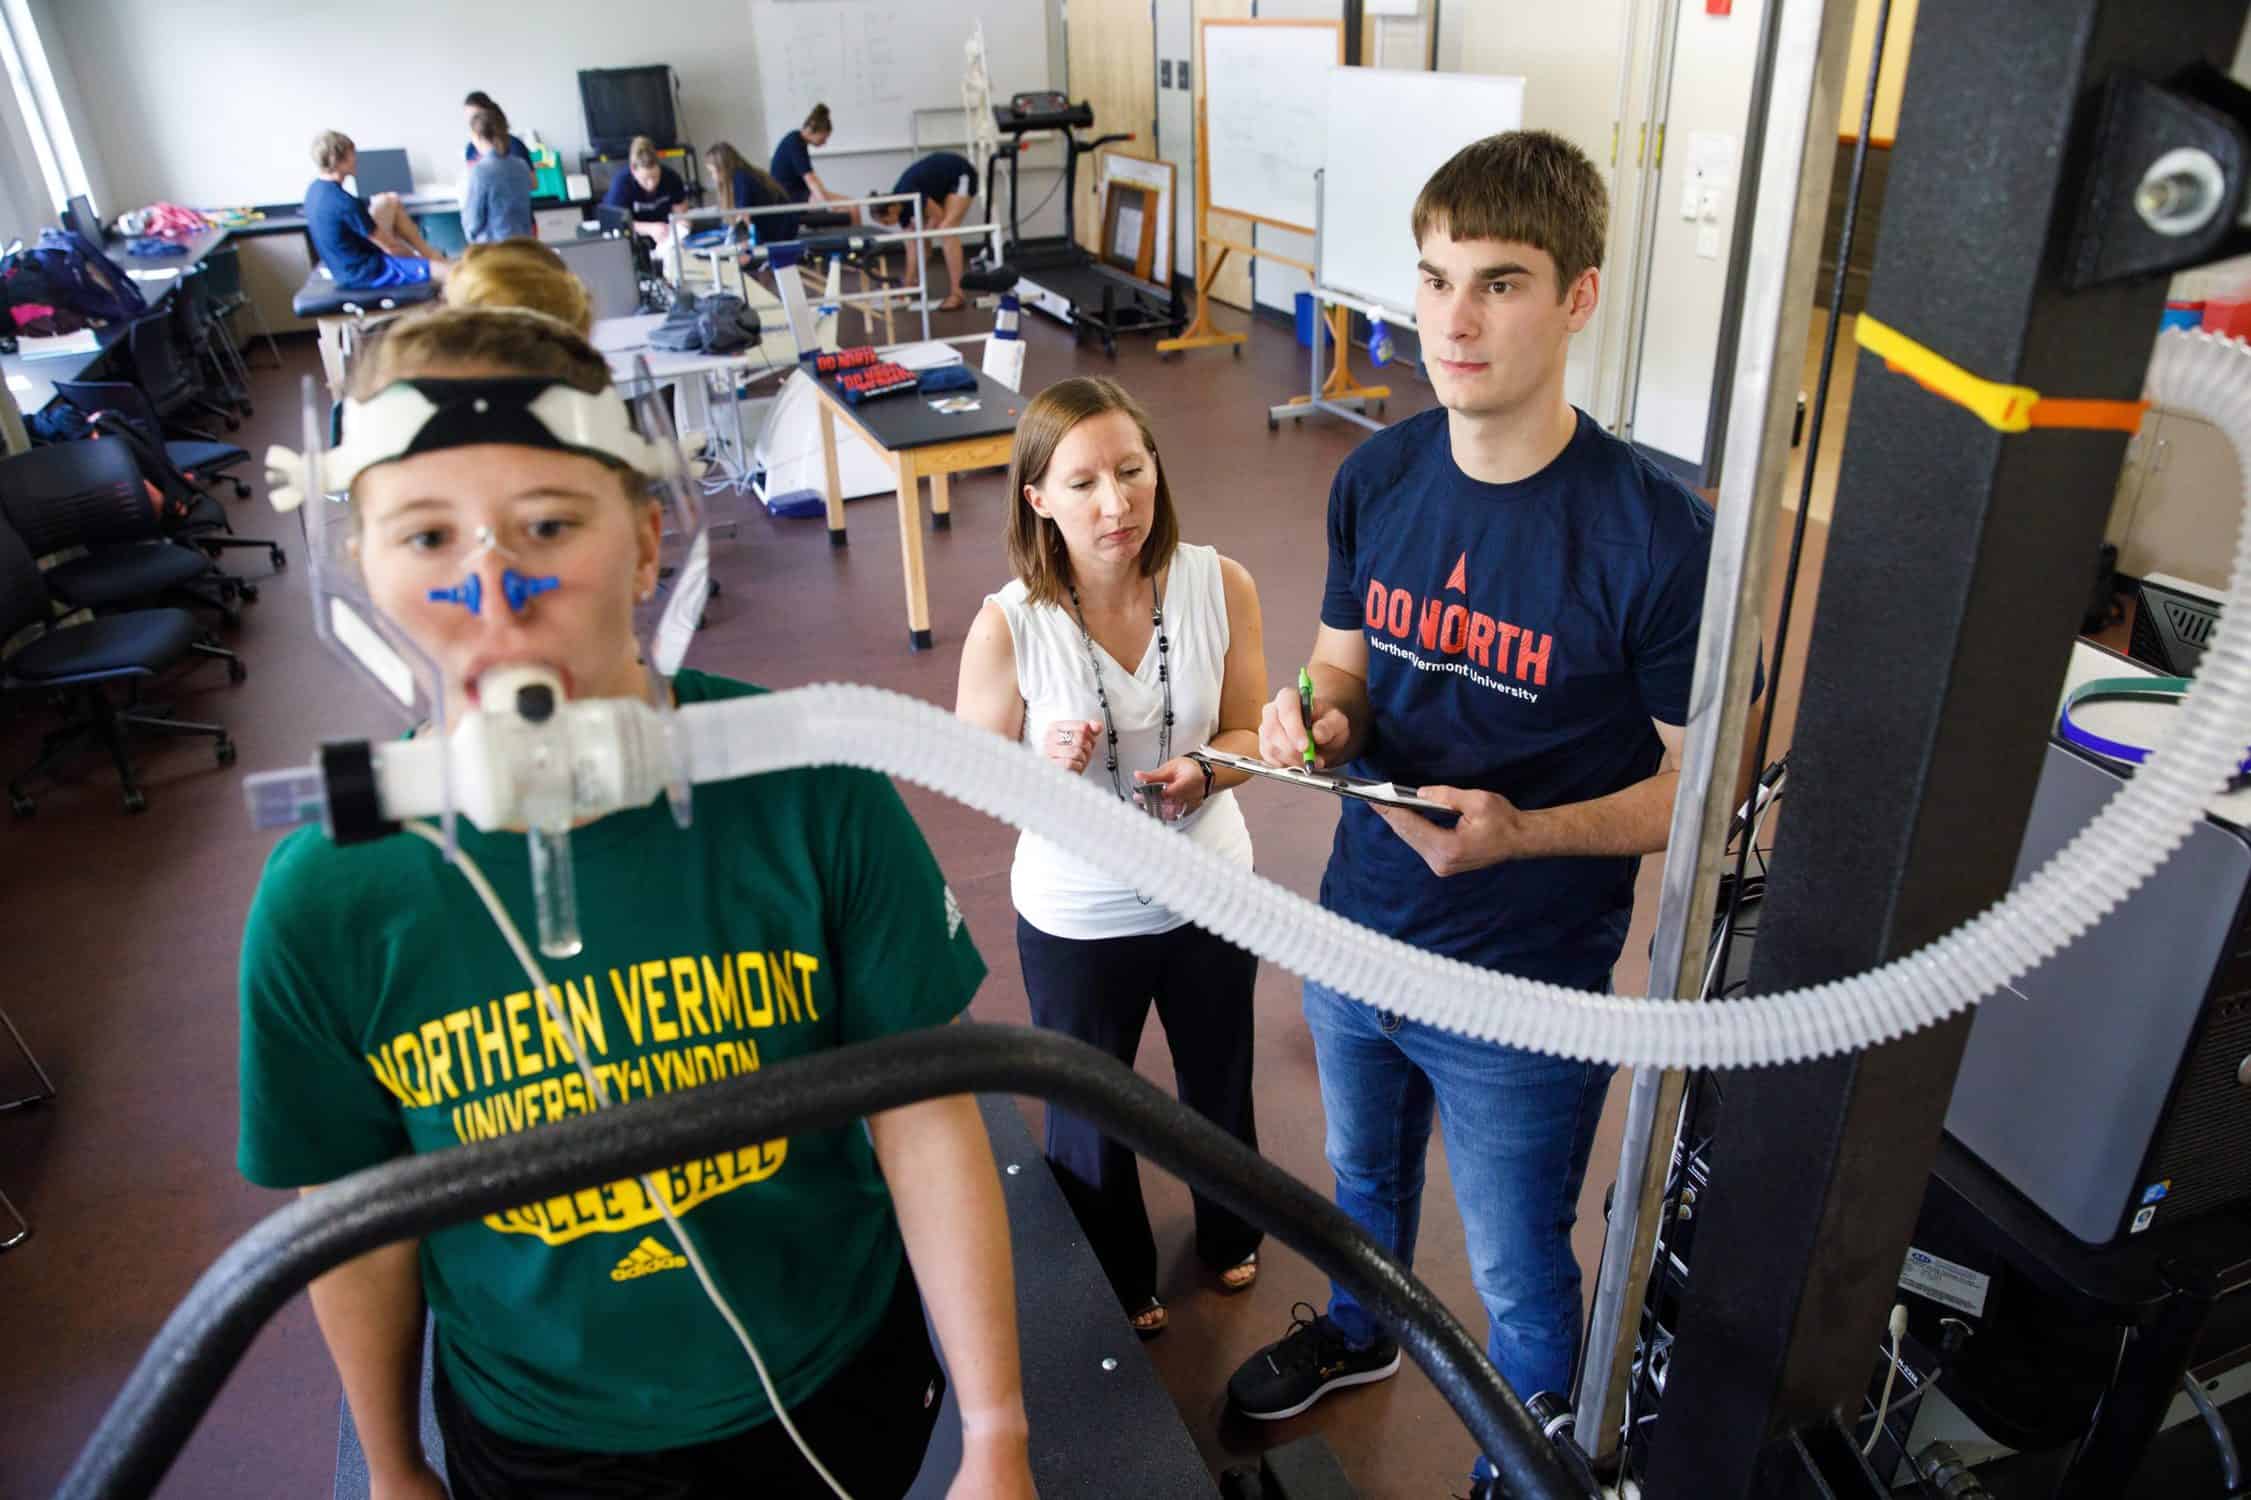 Student has their performance measured while jogging on a treadmill with special equipment